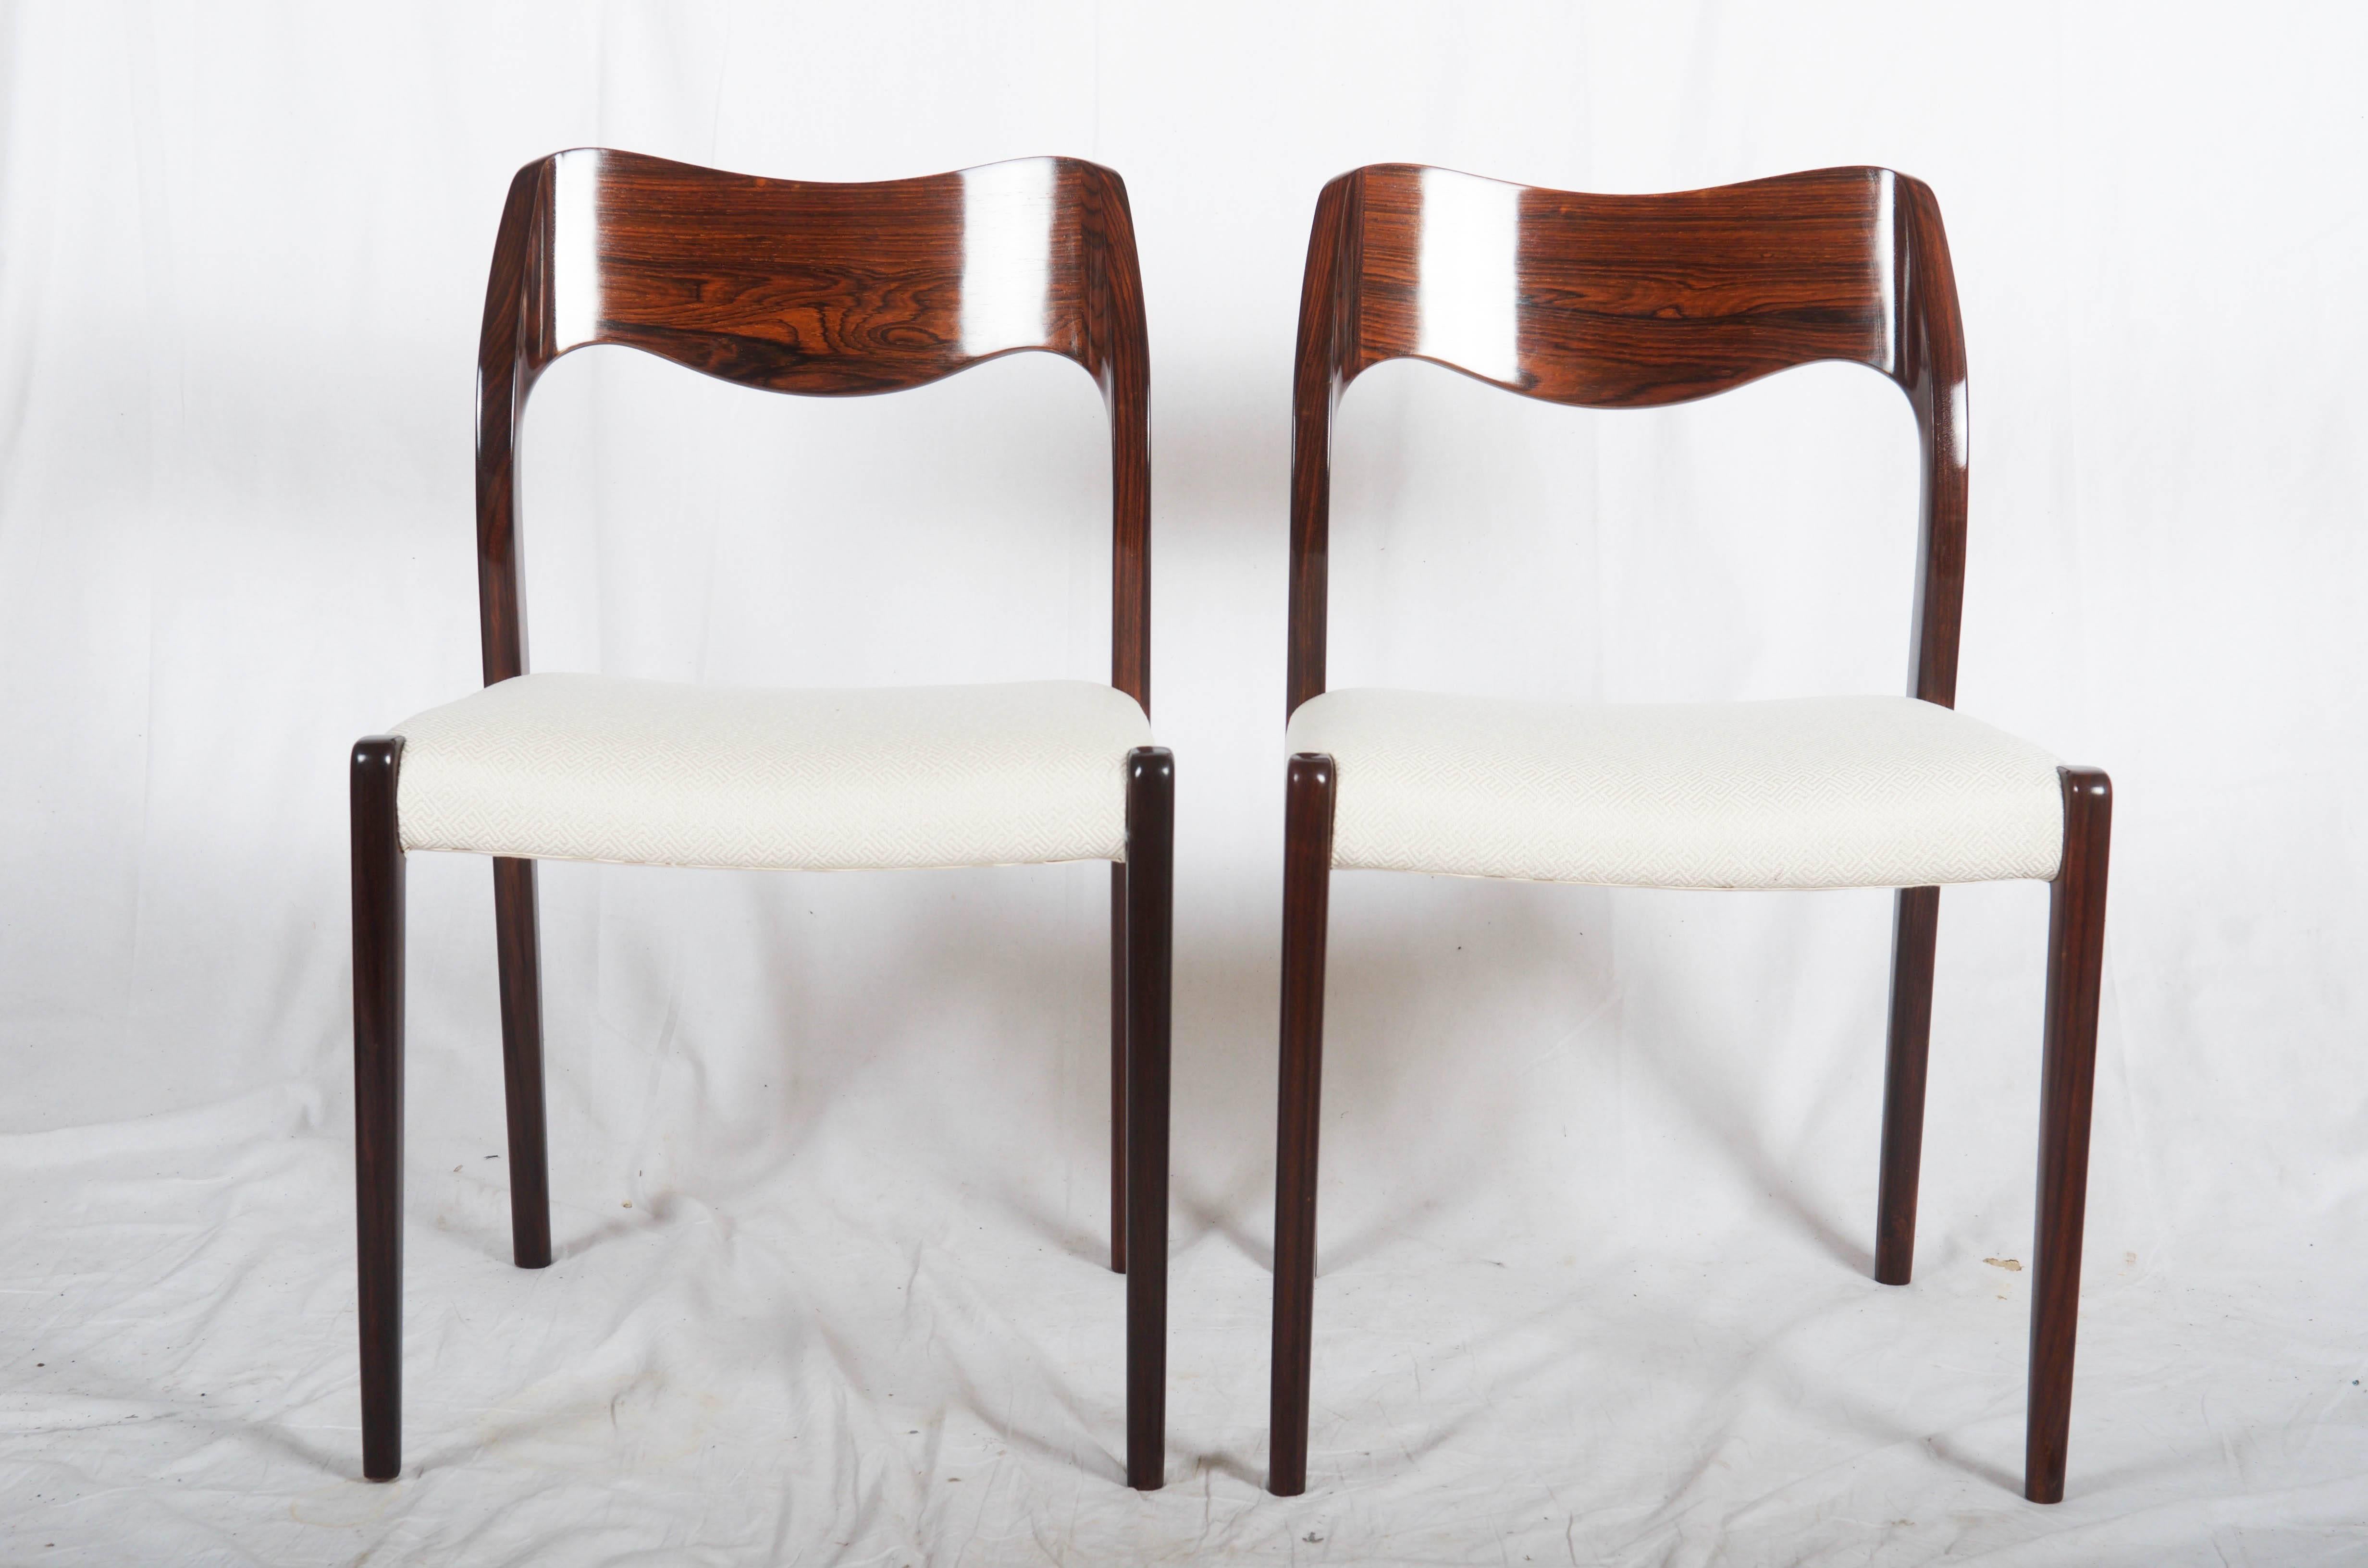 Dining chairs made of rosewood, designed 1951 by Niels Otto Møller and produced by J. L. Møller Møbelfabrik, model number 71. Excellent restored with new upholstered. (Another fabric or leather of course possible) Up to 12 available, delivery time